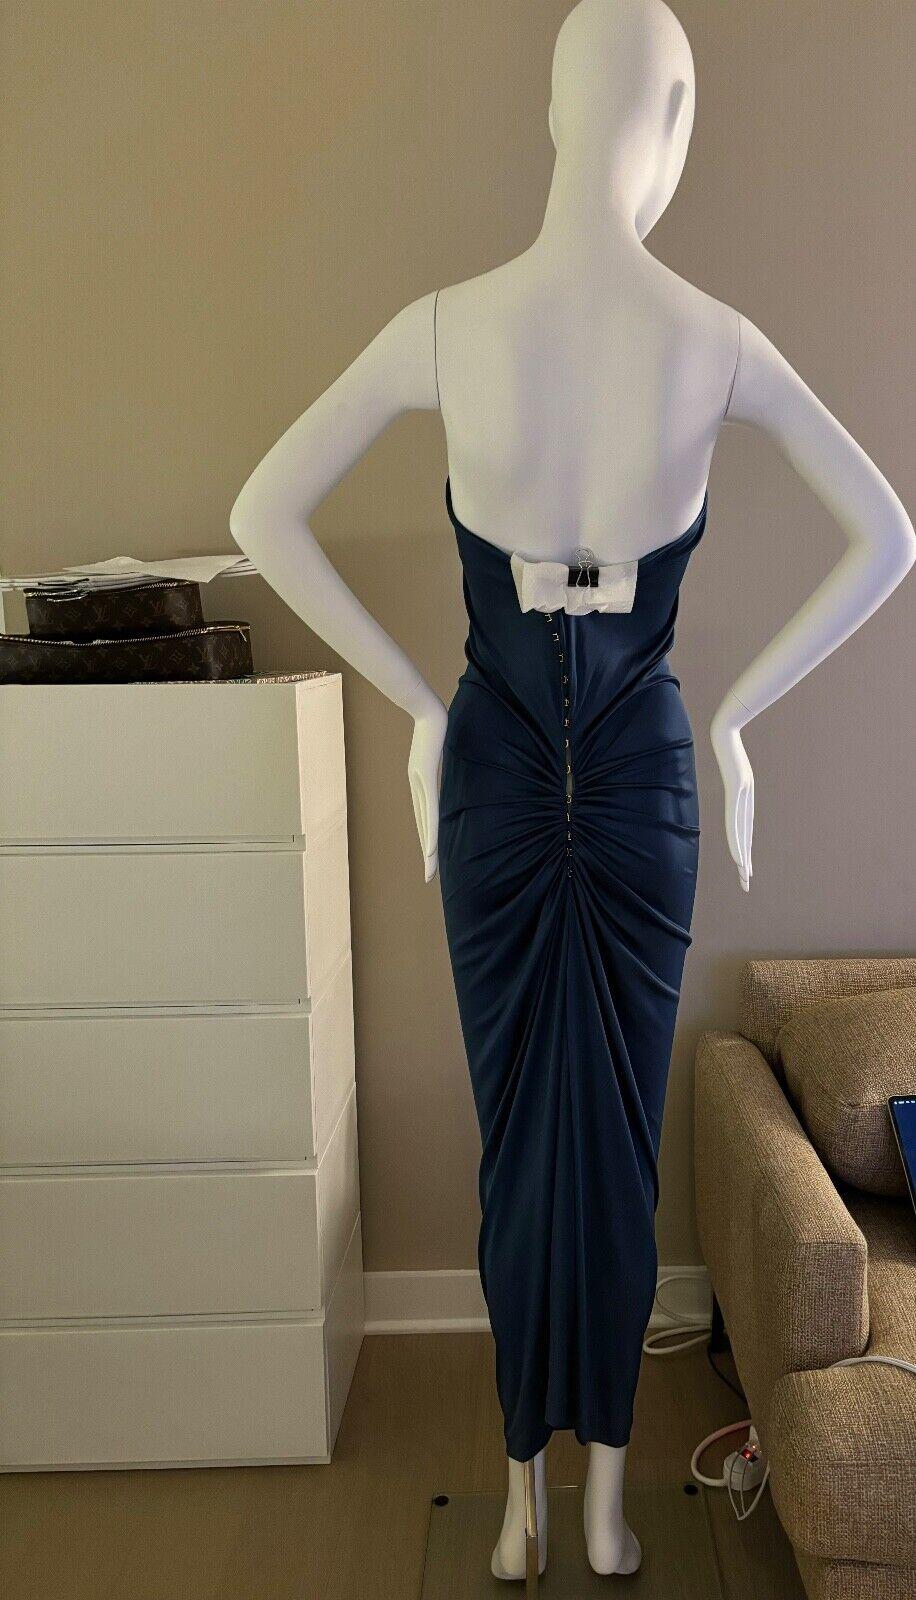 YSL by Tom Ford Rive Gauche Vintage evening gown maxi dress For Sale 3